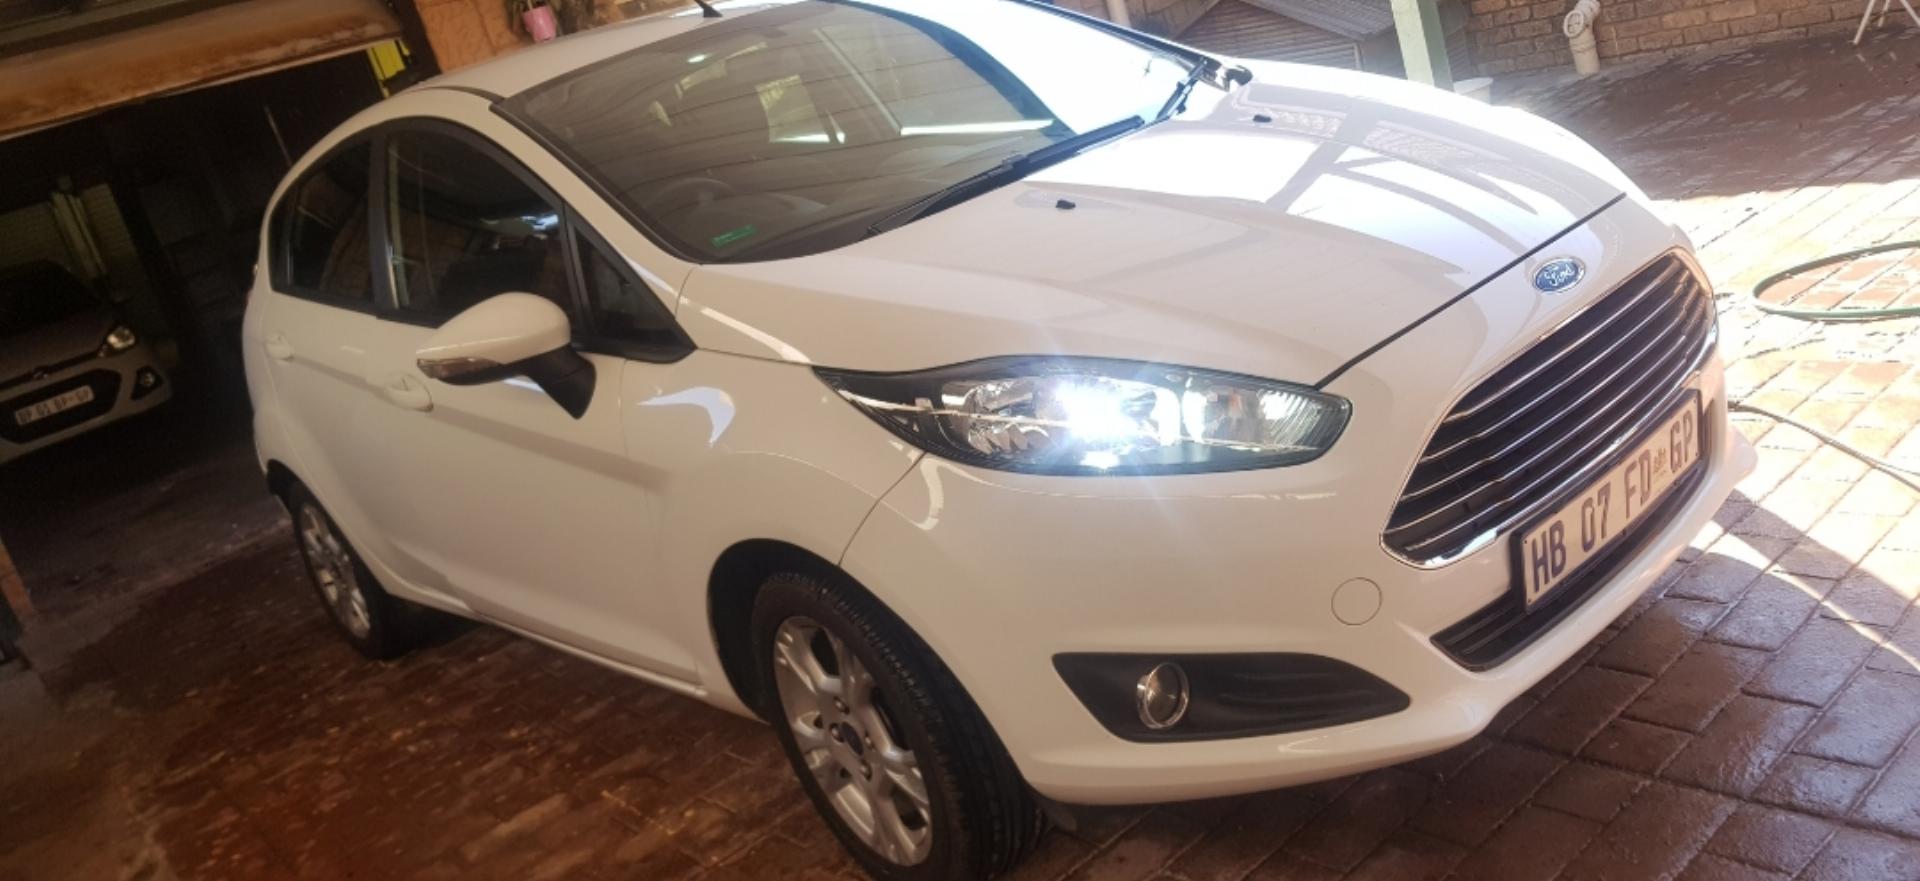 Ford Fiesta 1.6 Tdci Econetic Technology